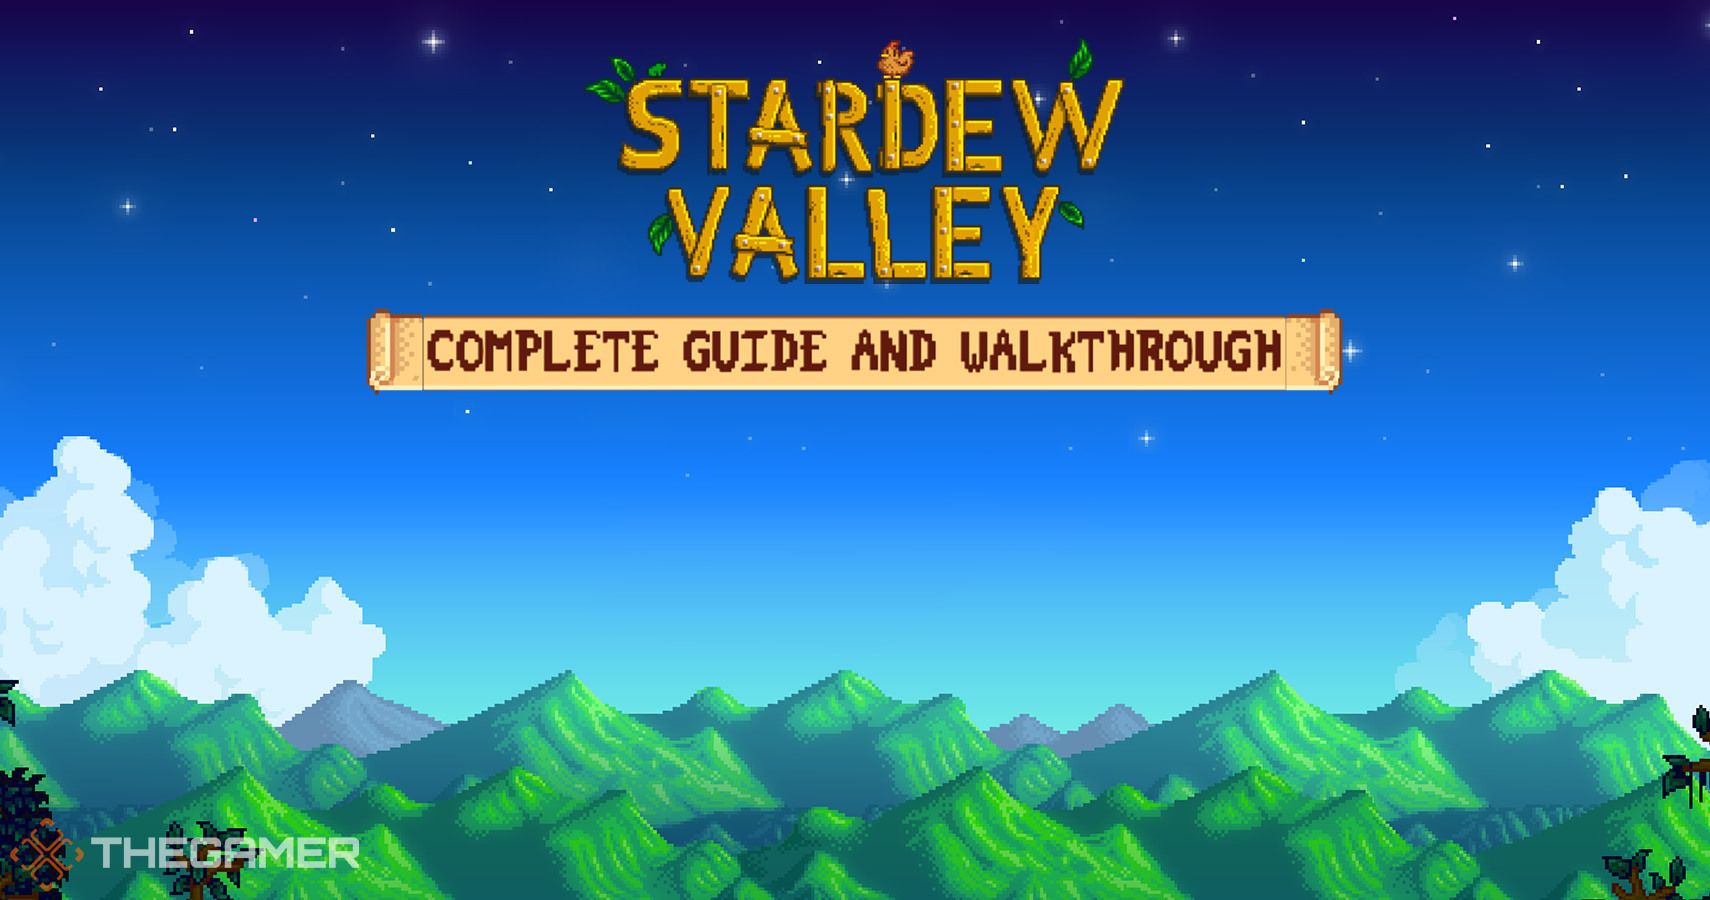 stardew-valley-complete-guide-and-walkthrough-thegamer-philippines-new-hope